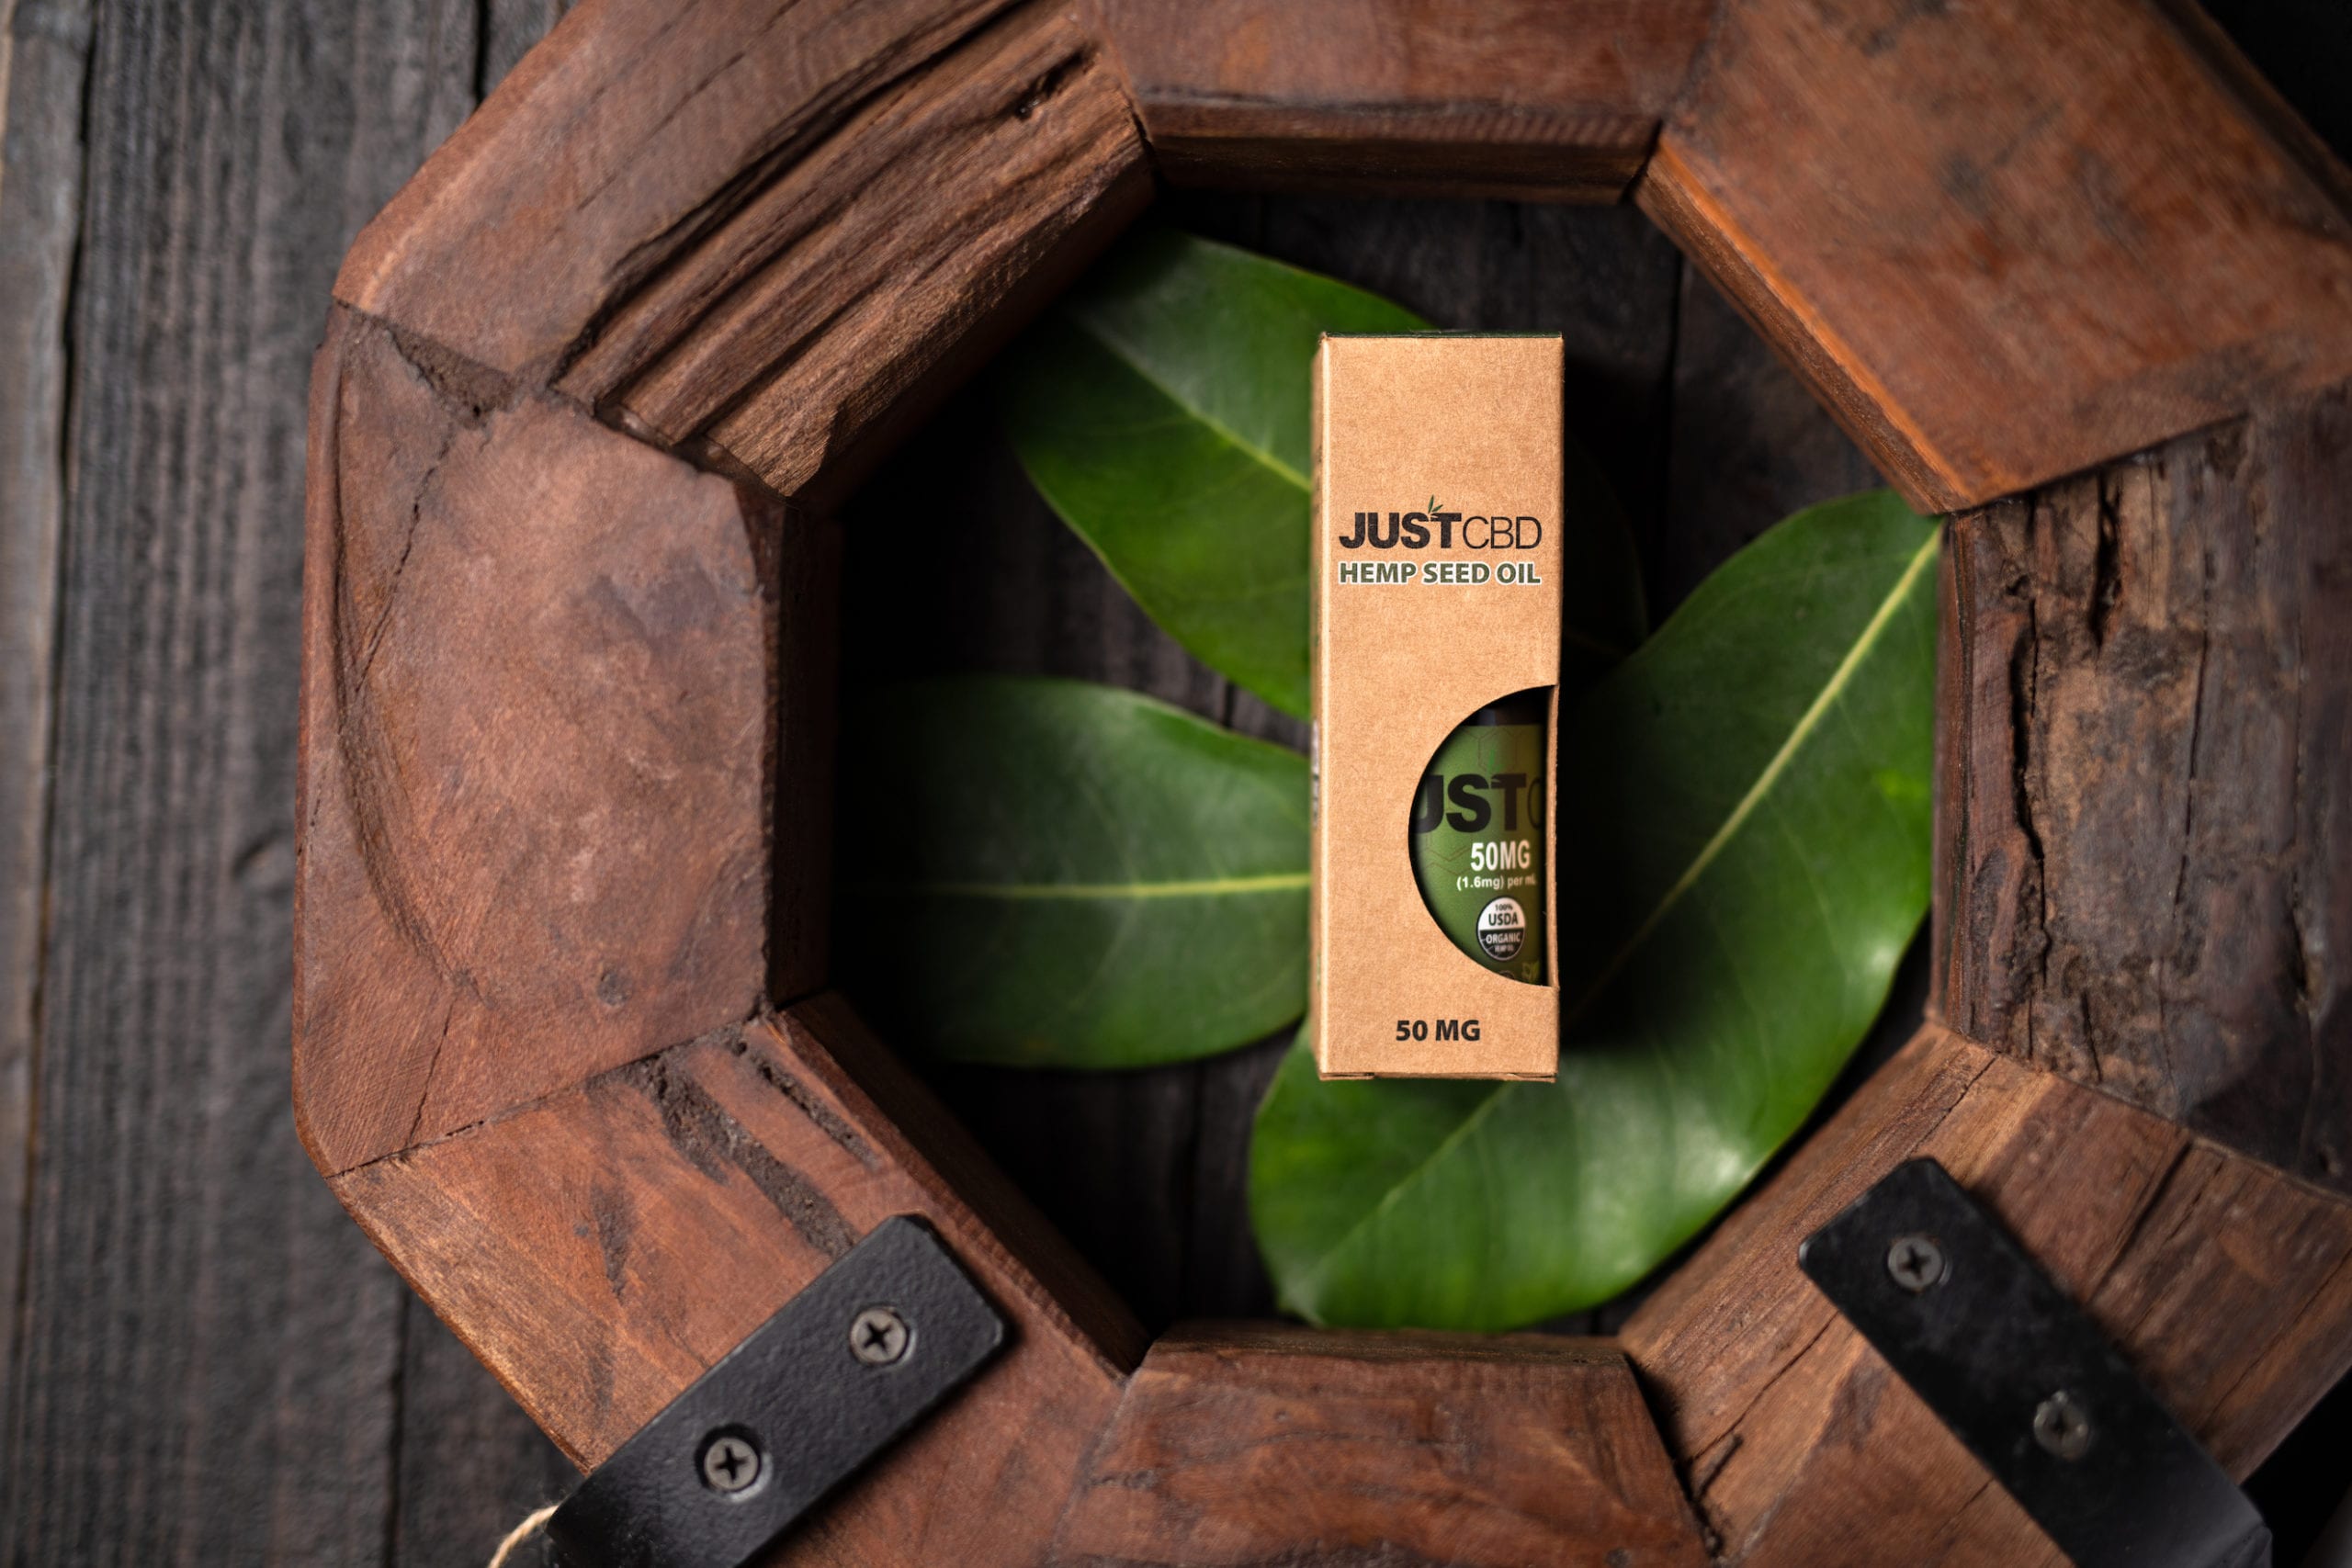 JustCBD Hemp Seed Oil package on display on green plant leaves surrounded by wood blocks